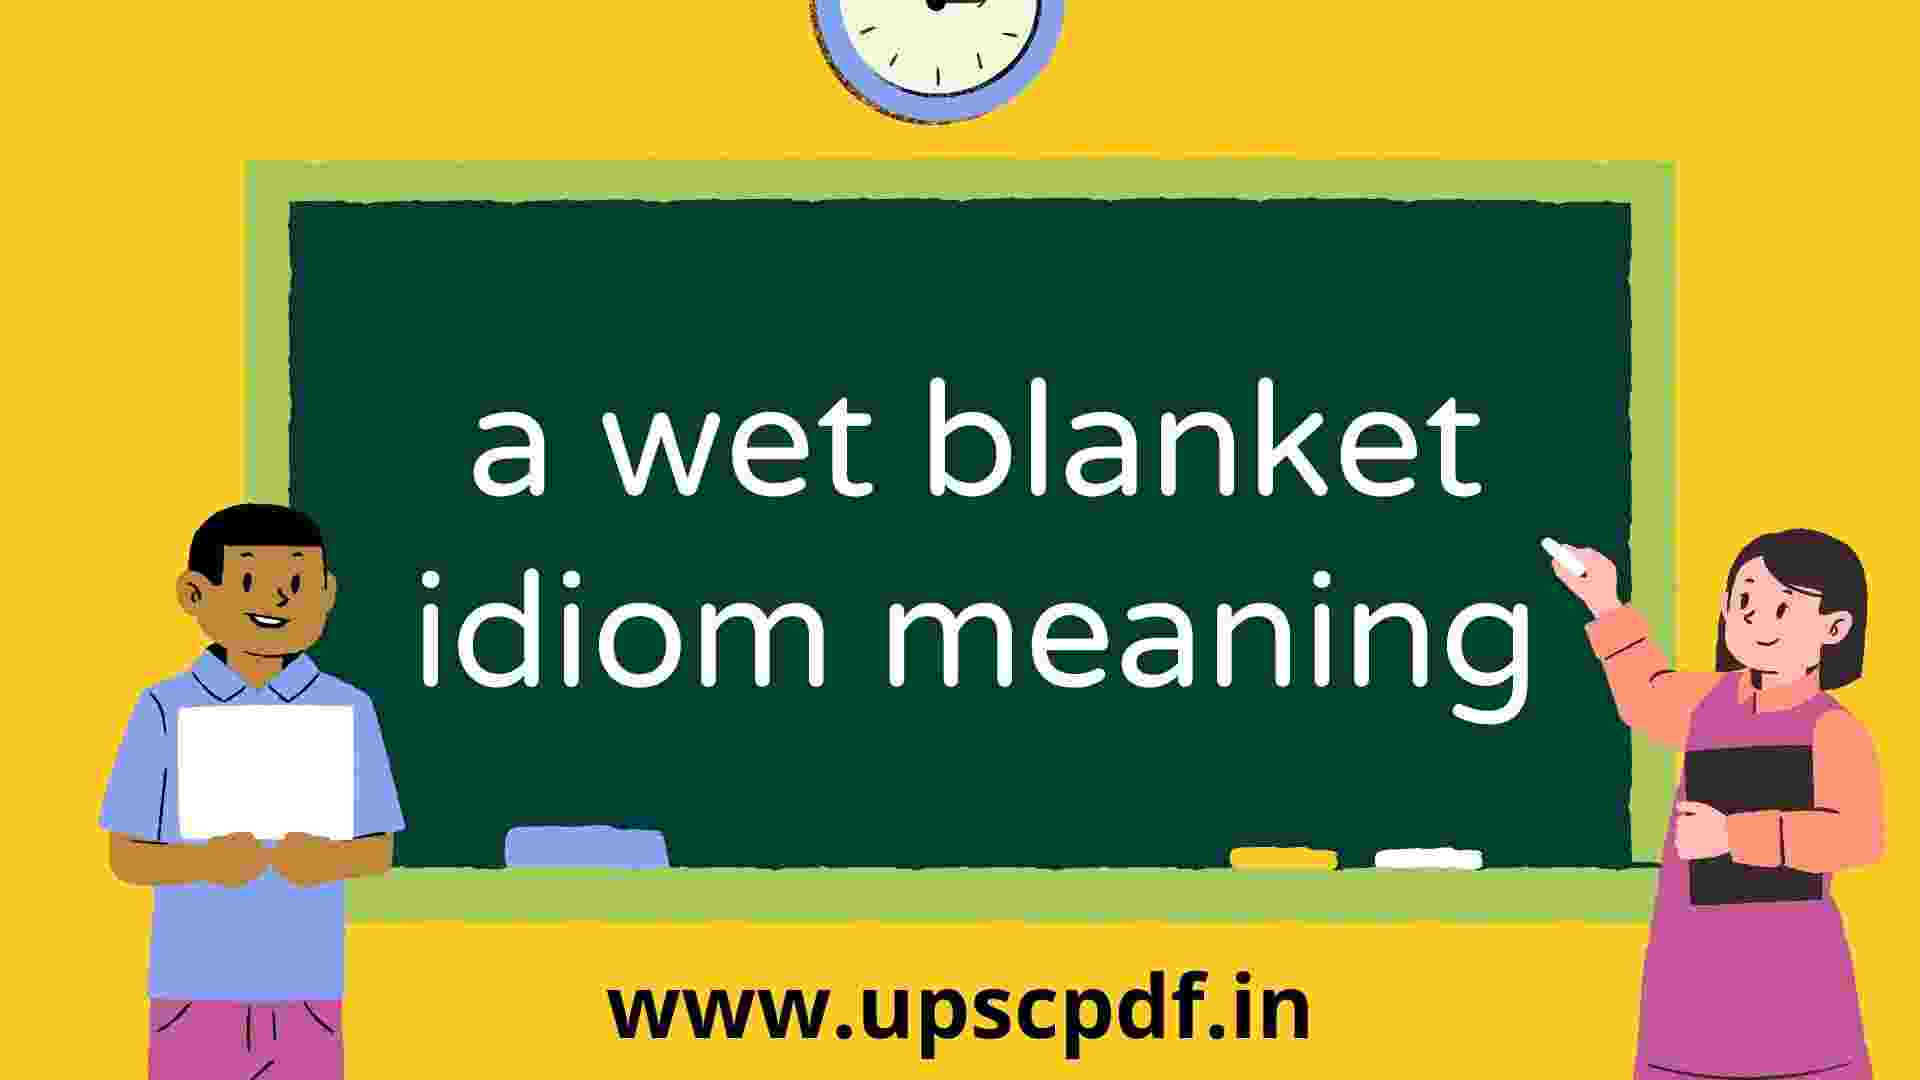 a wet blanket idiom meaning, a wet blanket idiom meaning in hindi, a wet blanket idiom meaning and sentence, a wet blanket idiom meaning in urdu, wet blanket idiom origin, wet blanket synonyms, wet blanket example, wet blanket urban dictionary, wet blanket meaning in malayalam